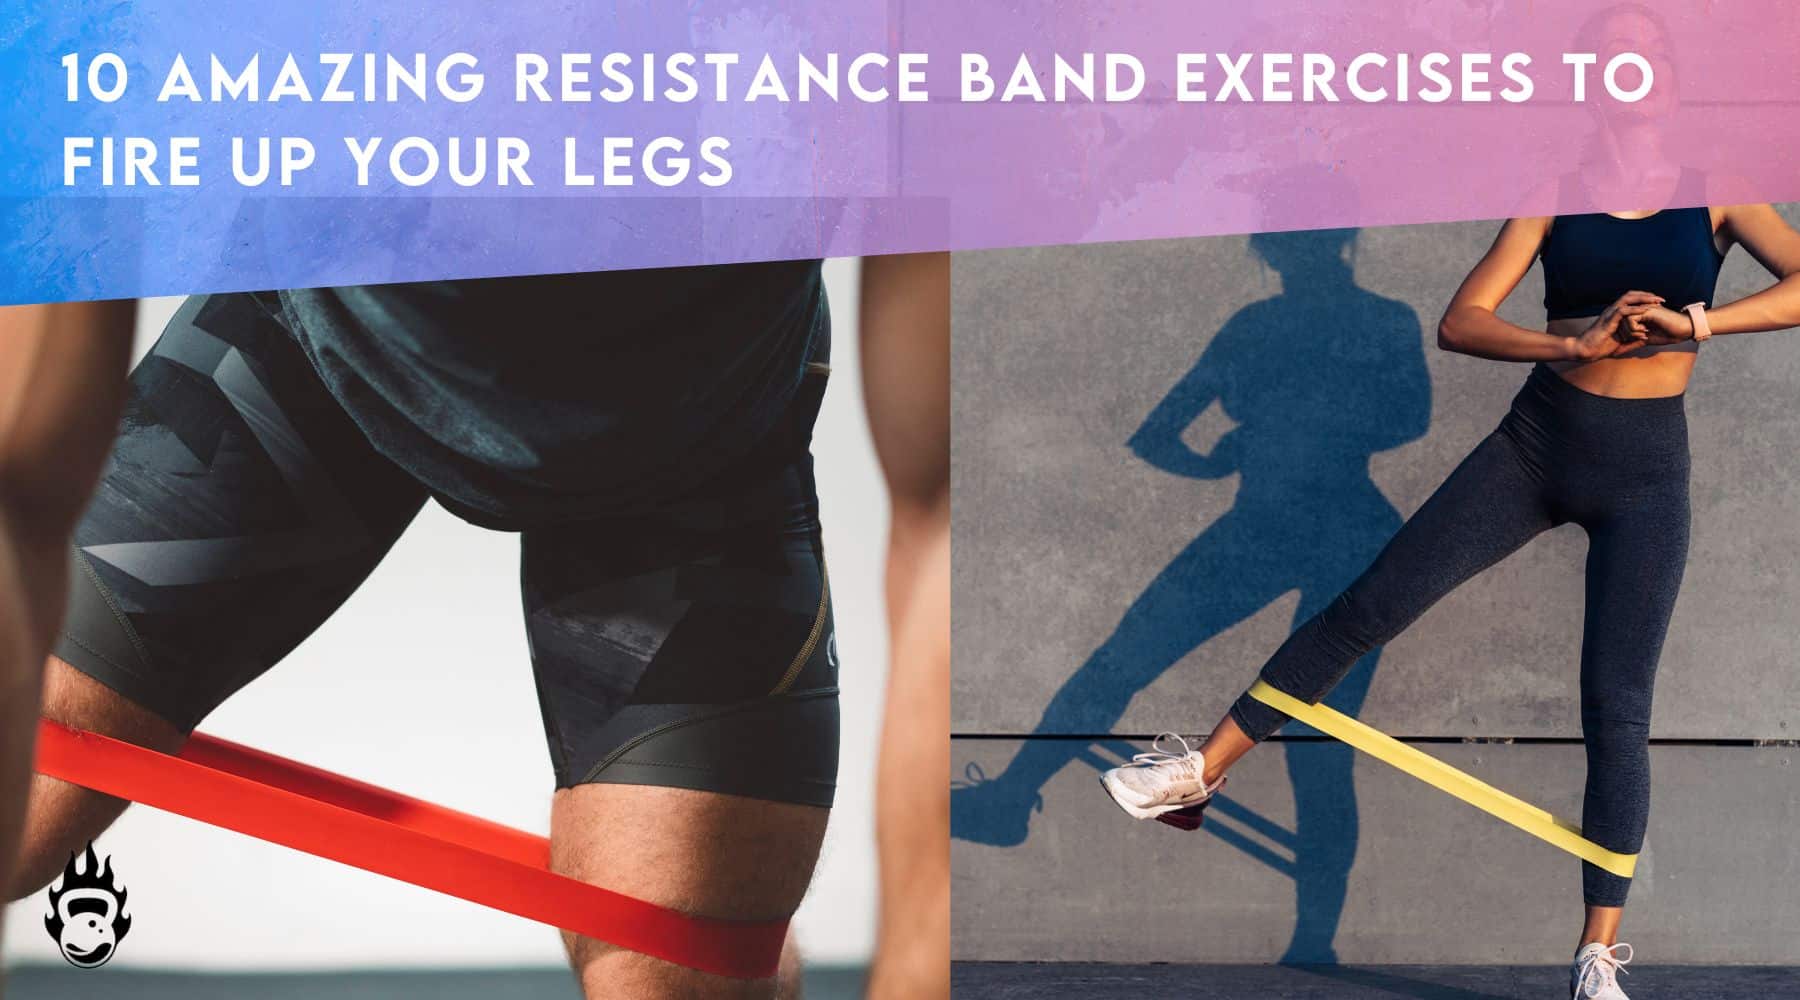 The 7 Best Resistance Band Exercises for Building Bigger, Better Glutes